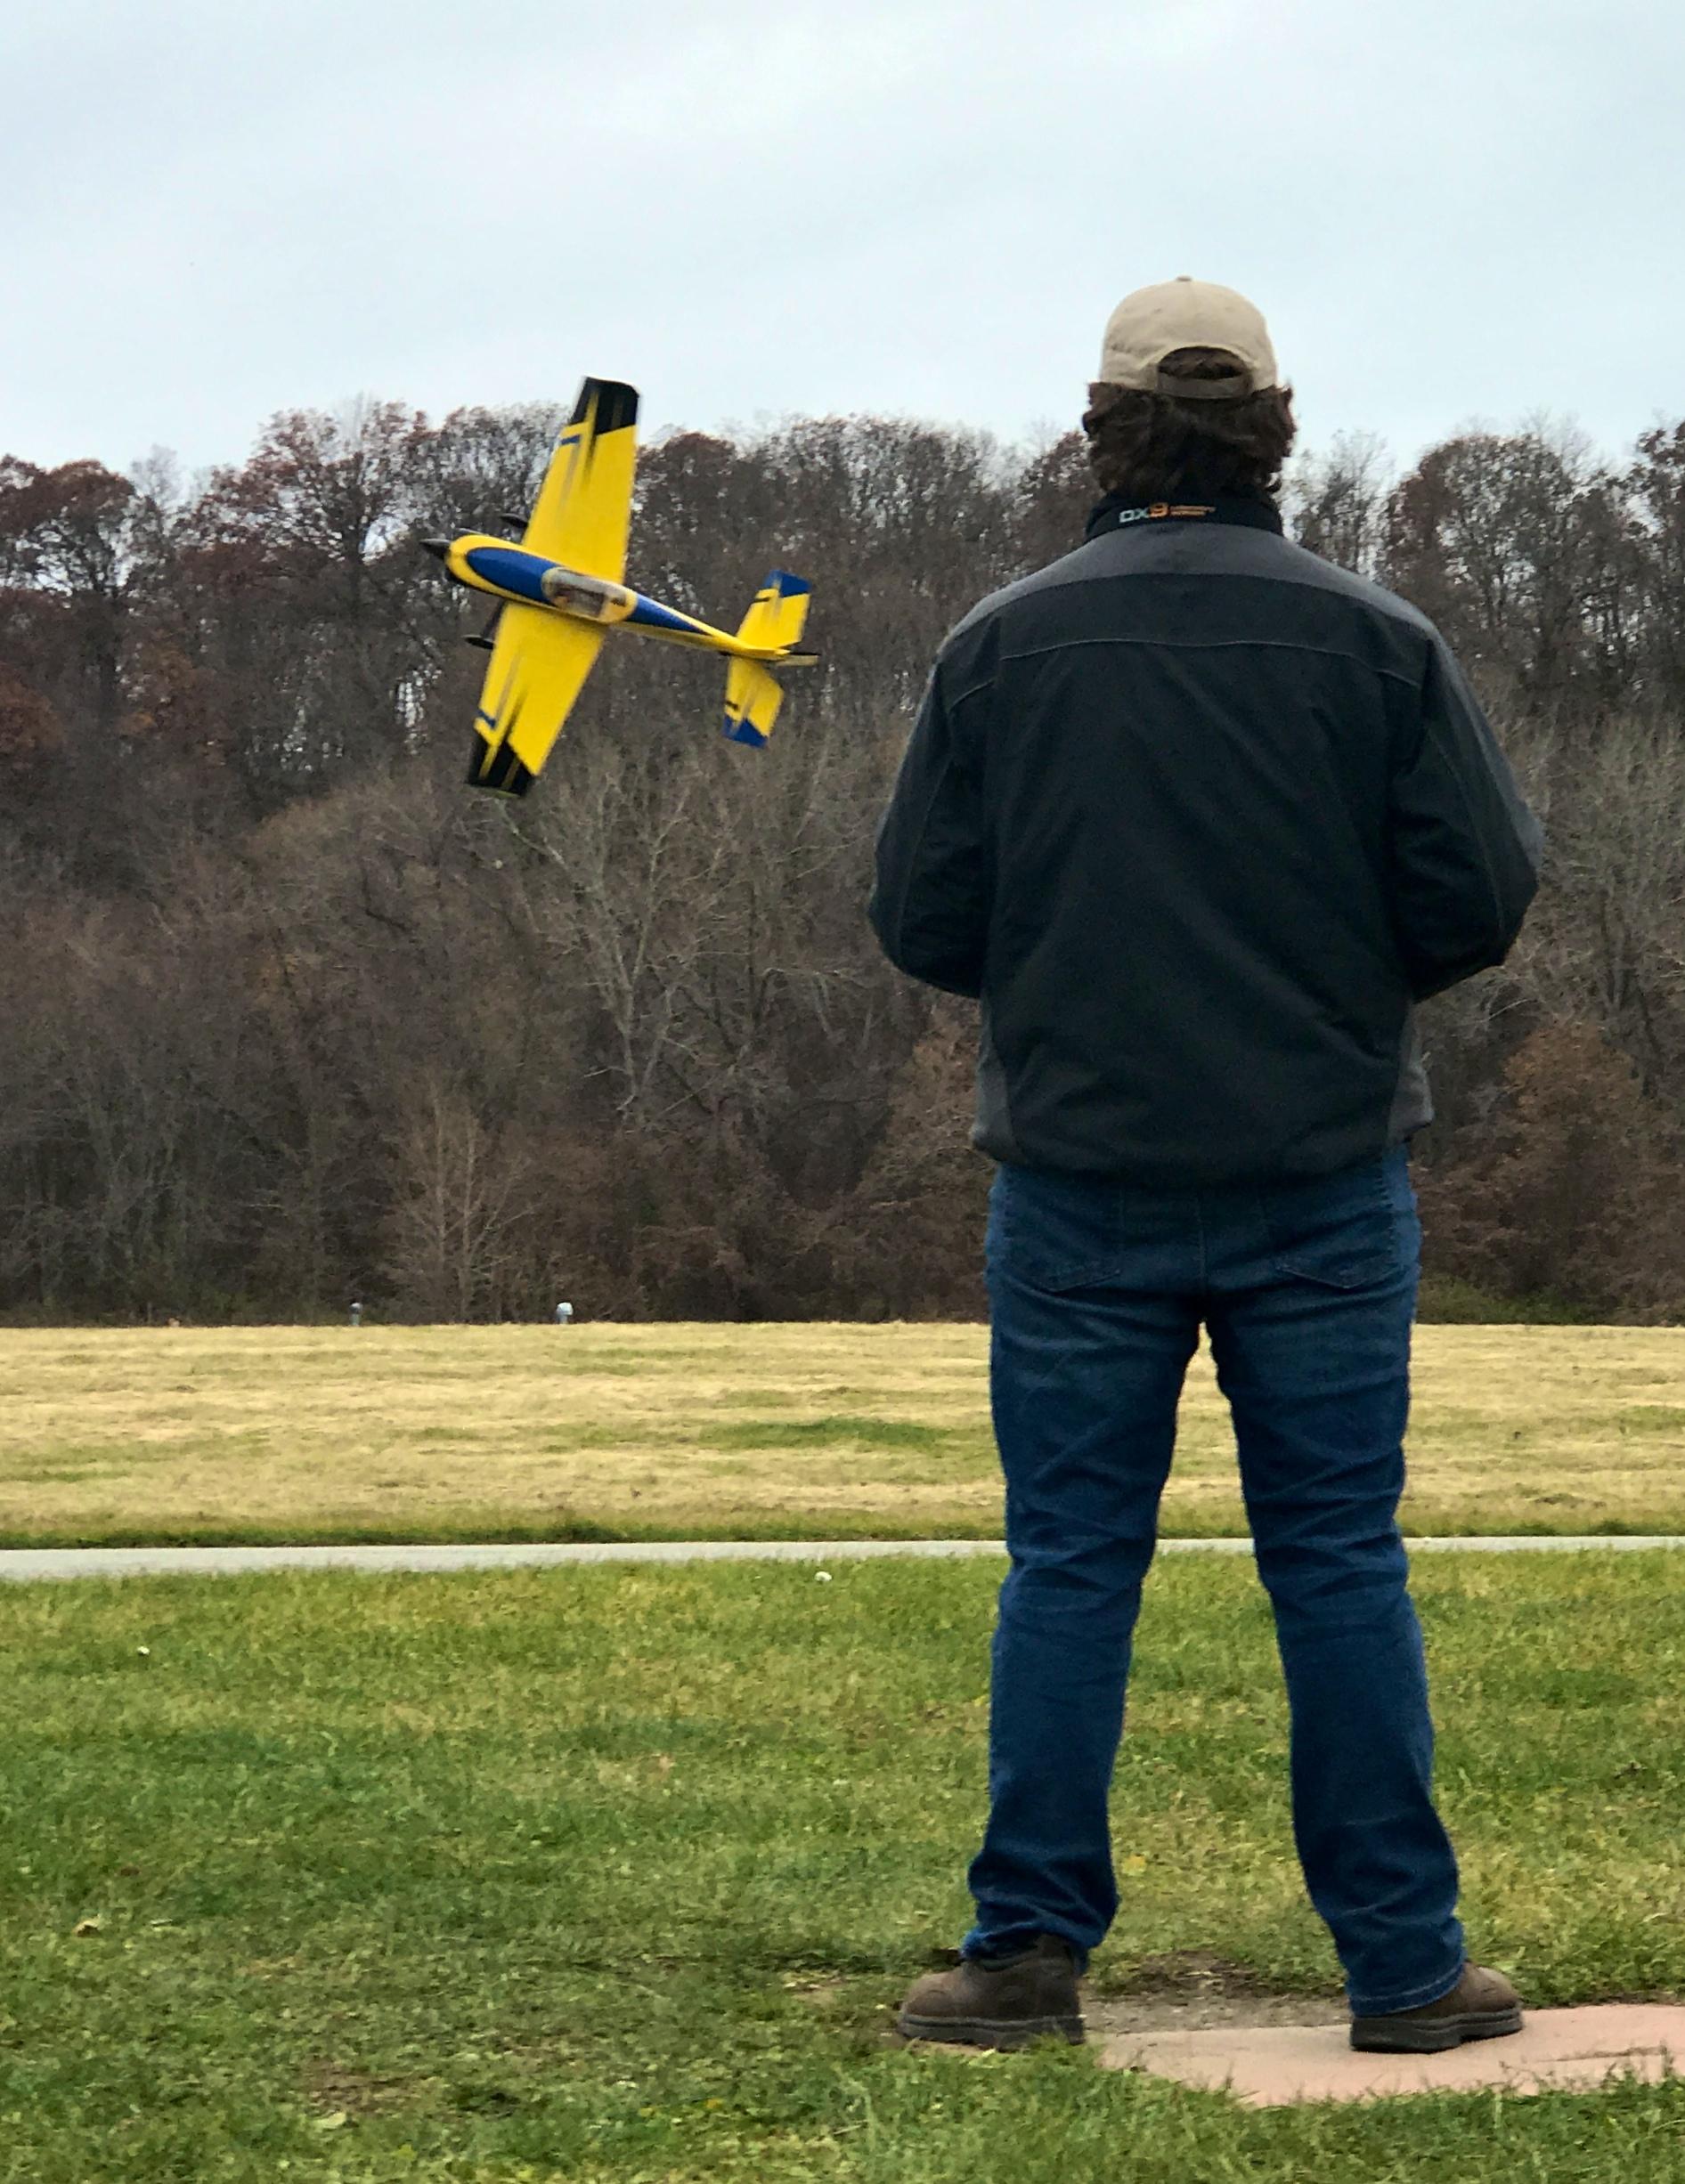 2 Channel Rc Plane: Benefits and Drawbacks of 2 Channel RC Planes